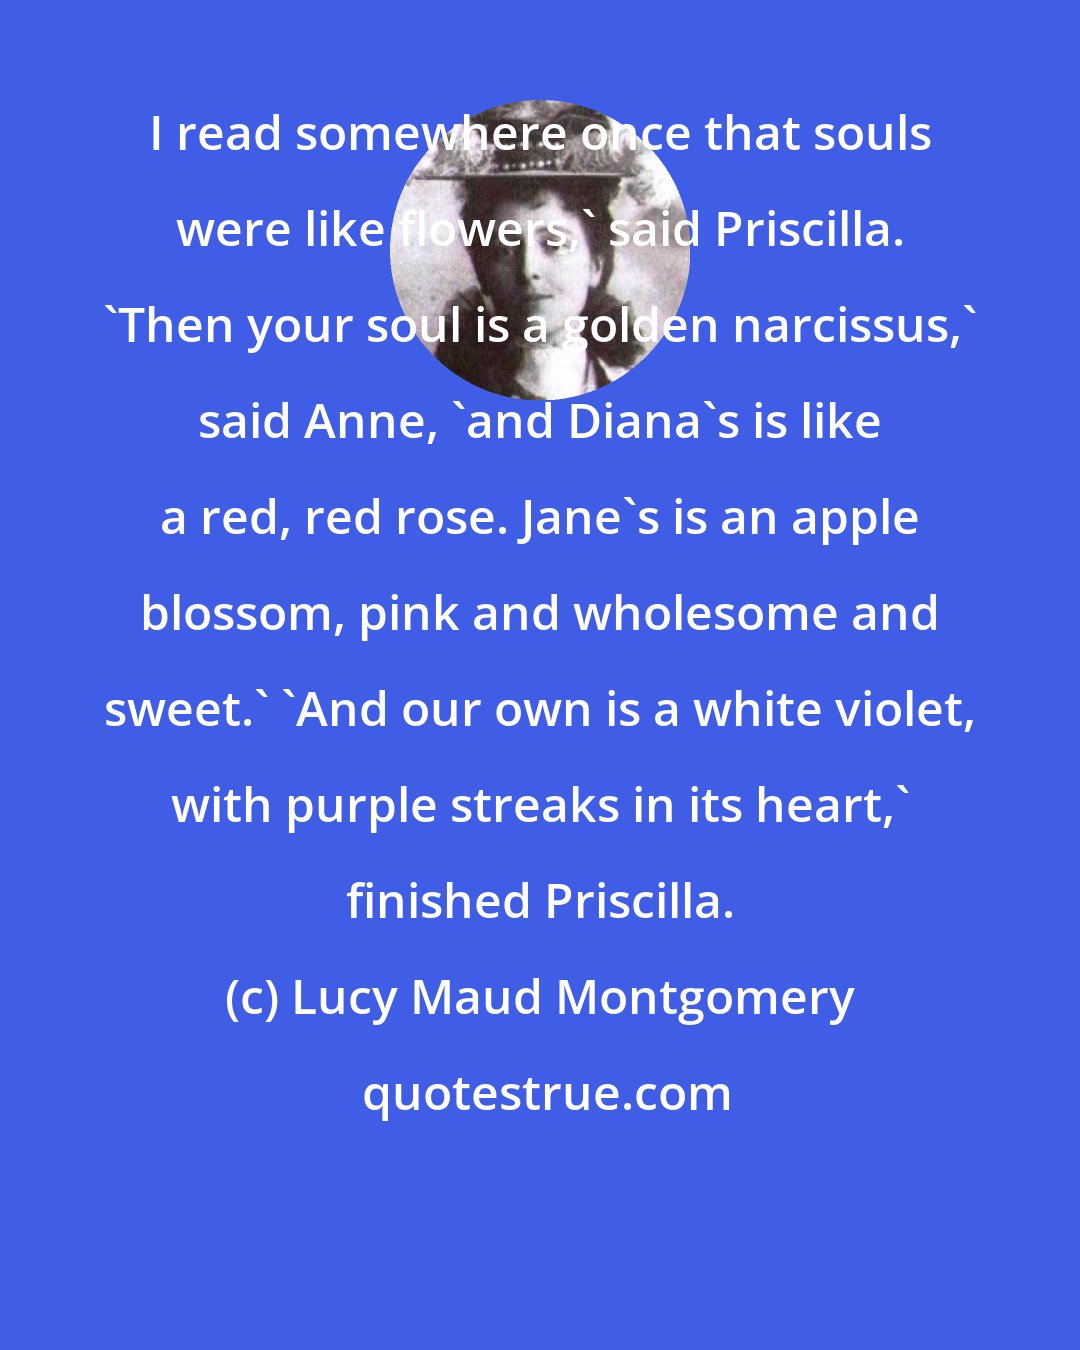 Lucy Maud Montgomery: I read somewhere once that souls were like flowers,' said Priscilla. 'Then your soul is a golden narcissus,' said Anne, 'and Diana's is like a red, red rose. Jane's is an apple blossom, pink and wholesome and sweet.' 'And our own is a white violet, with purple streaks in its heart,' finished Priscilla.